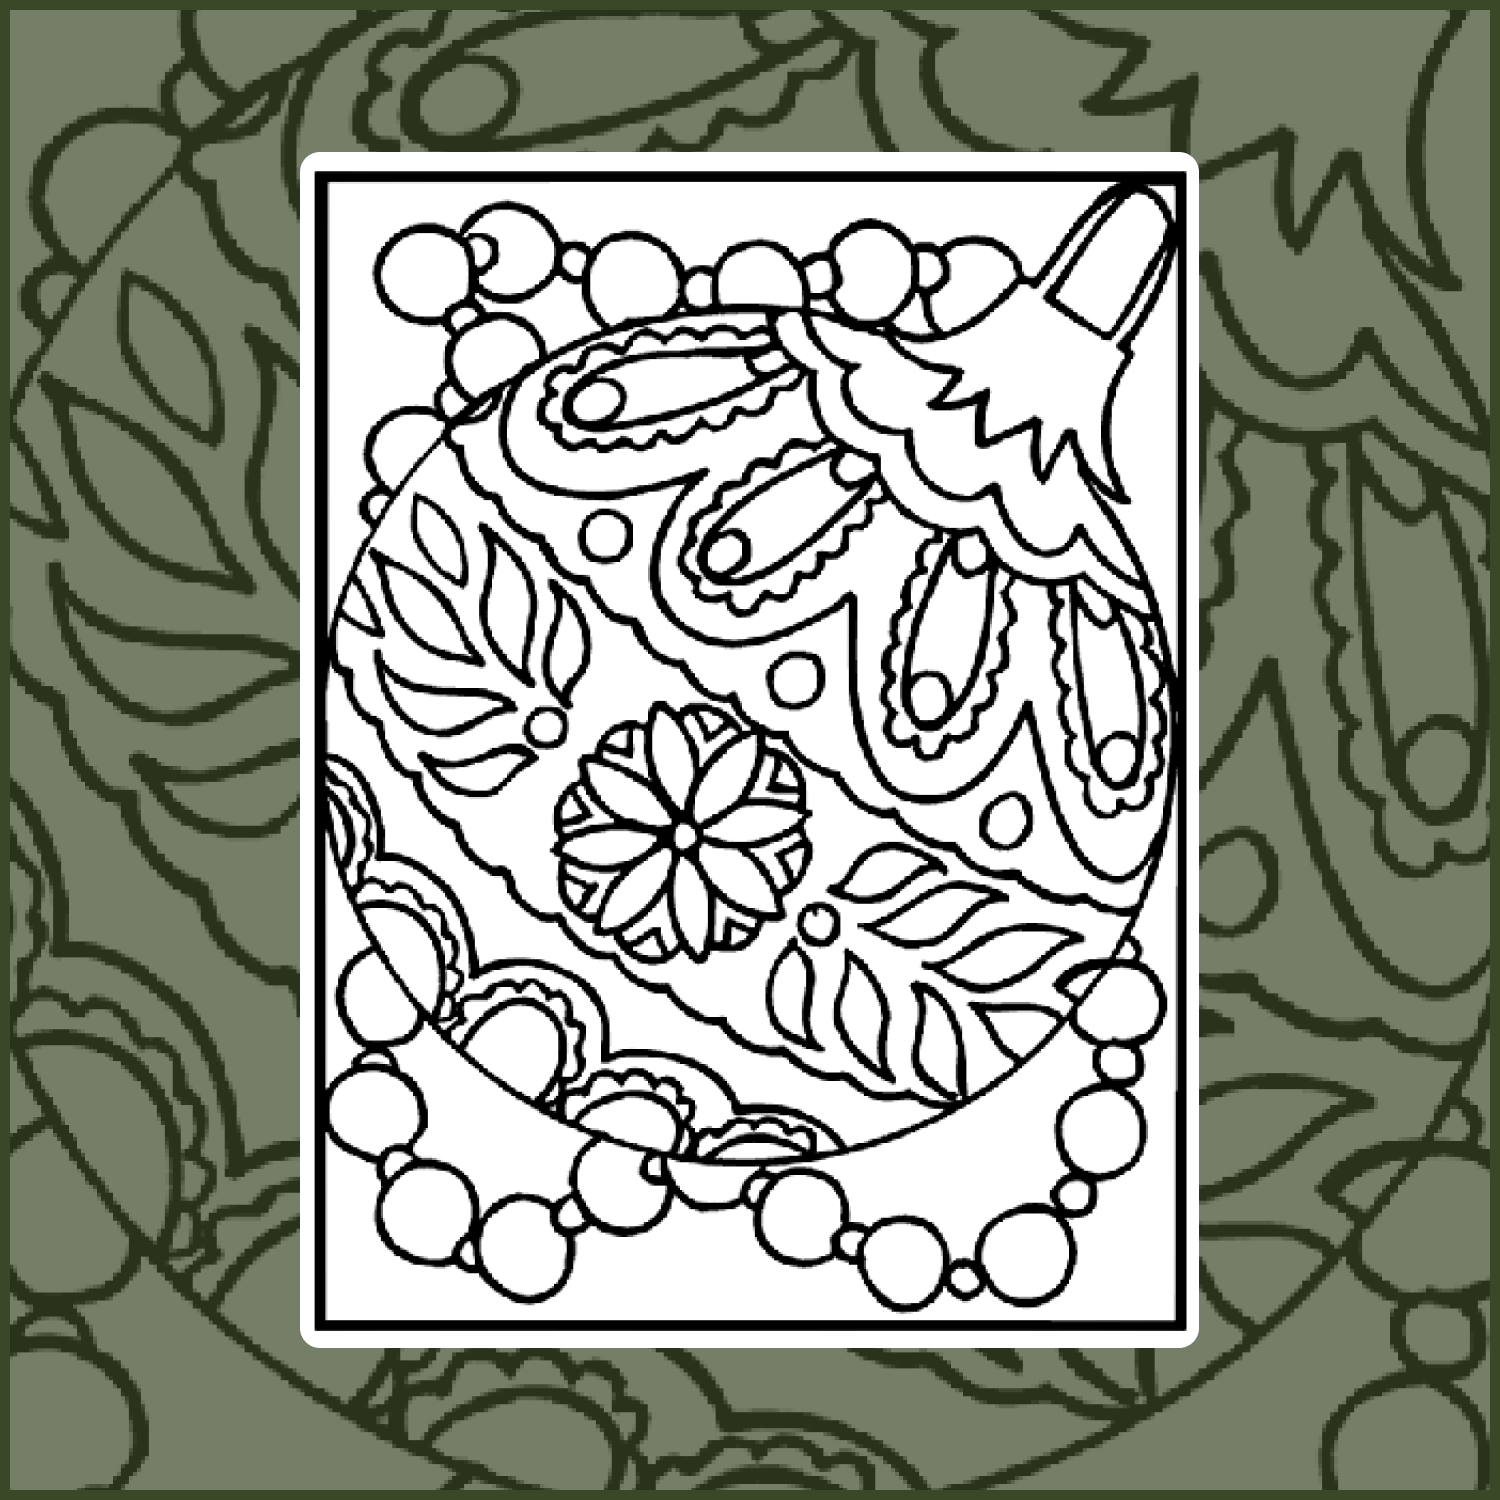 Christmas ornament coloring page cover image.